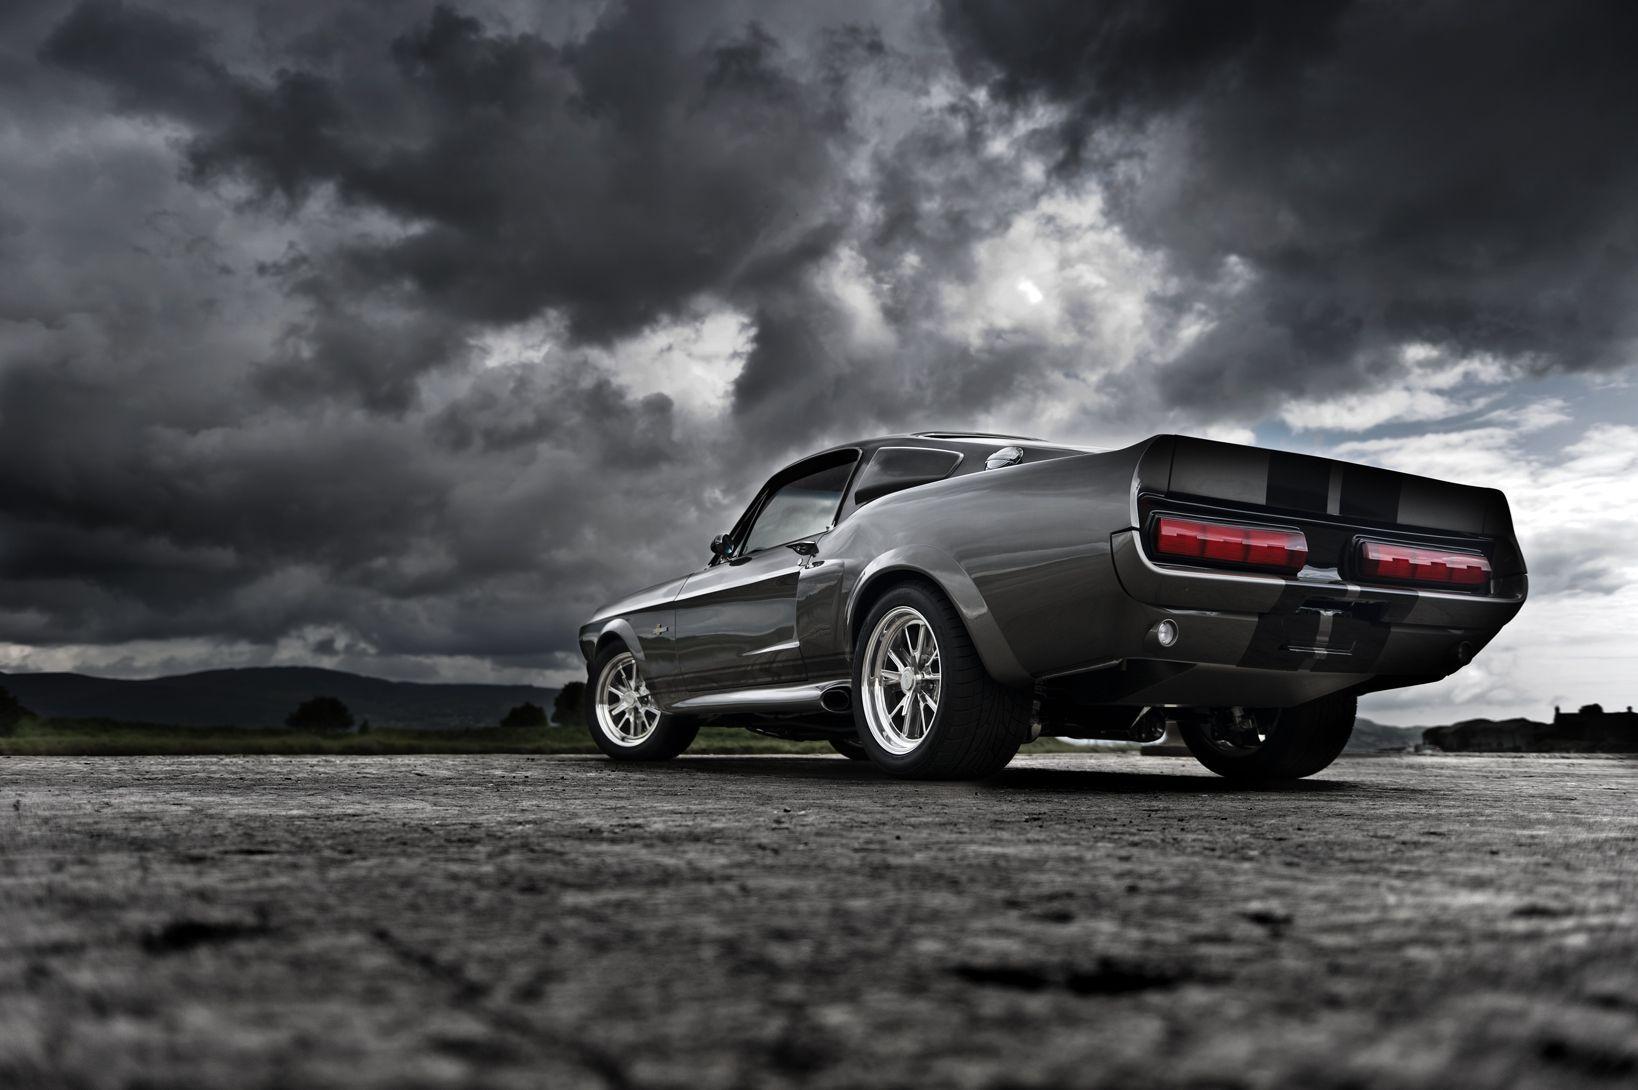 Pics For > 1967 Mustang Shelby Gt500 Wallpaper